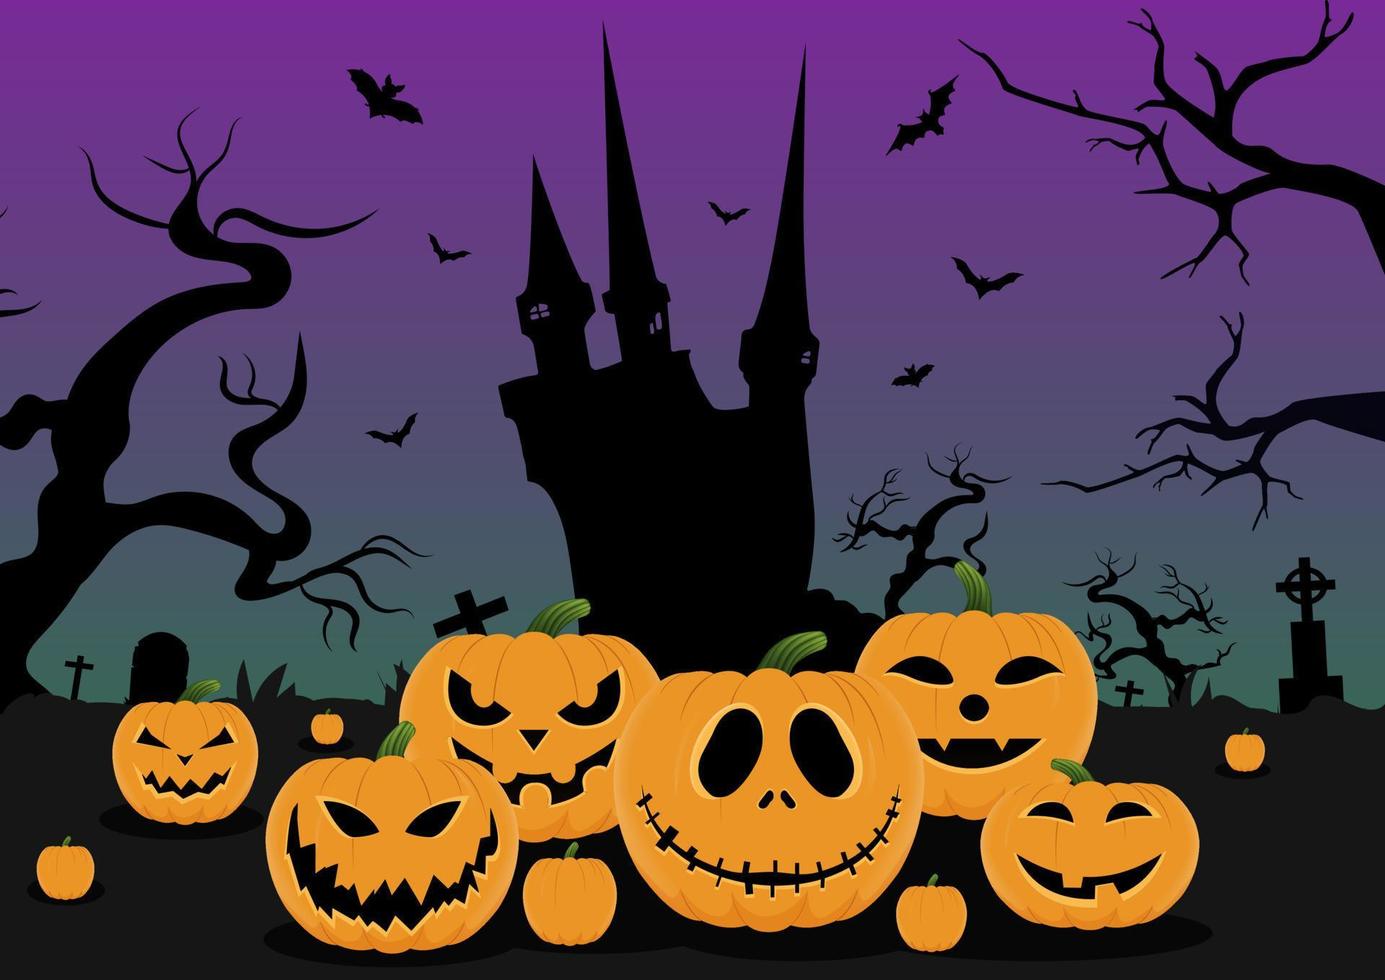 Scary night castle and cemetery with halloween pumpkins vector